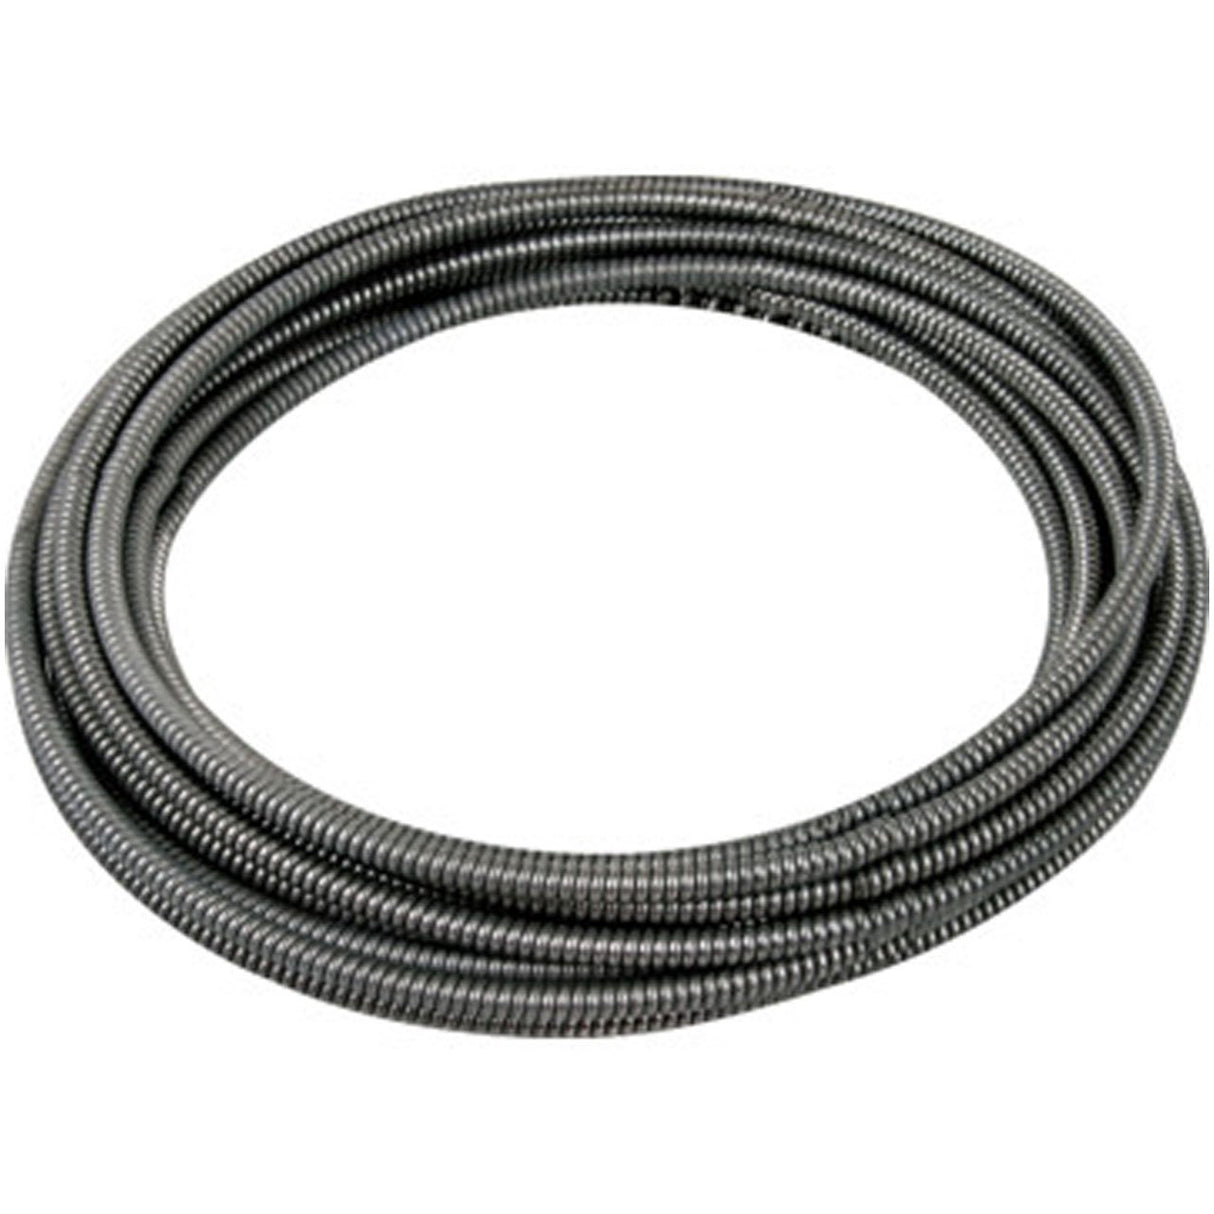 General Wire L-35FL1-DH 35' x 1/4" Down Head Replacement Flexicore Cables for Hand Tools (Handles Sold Separately)